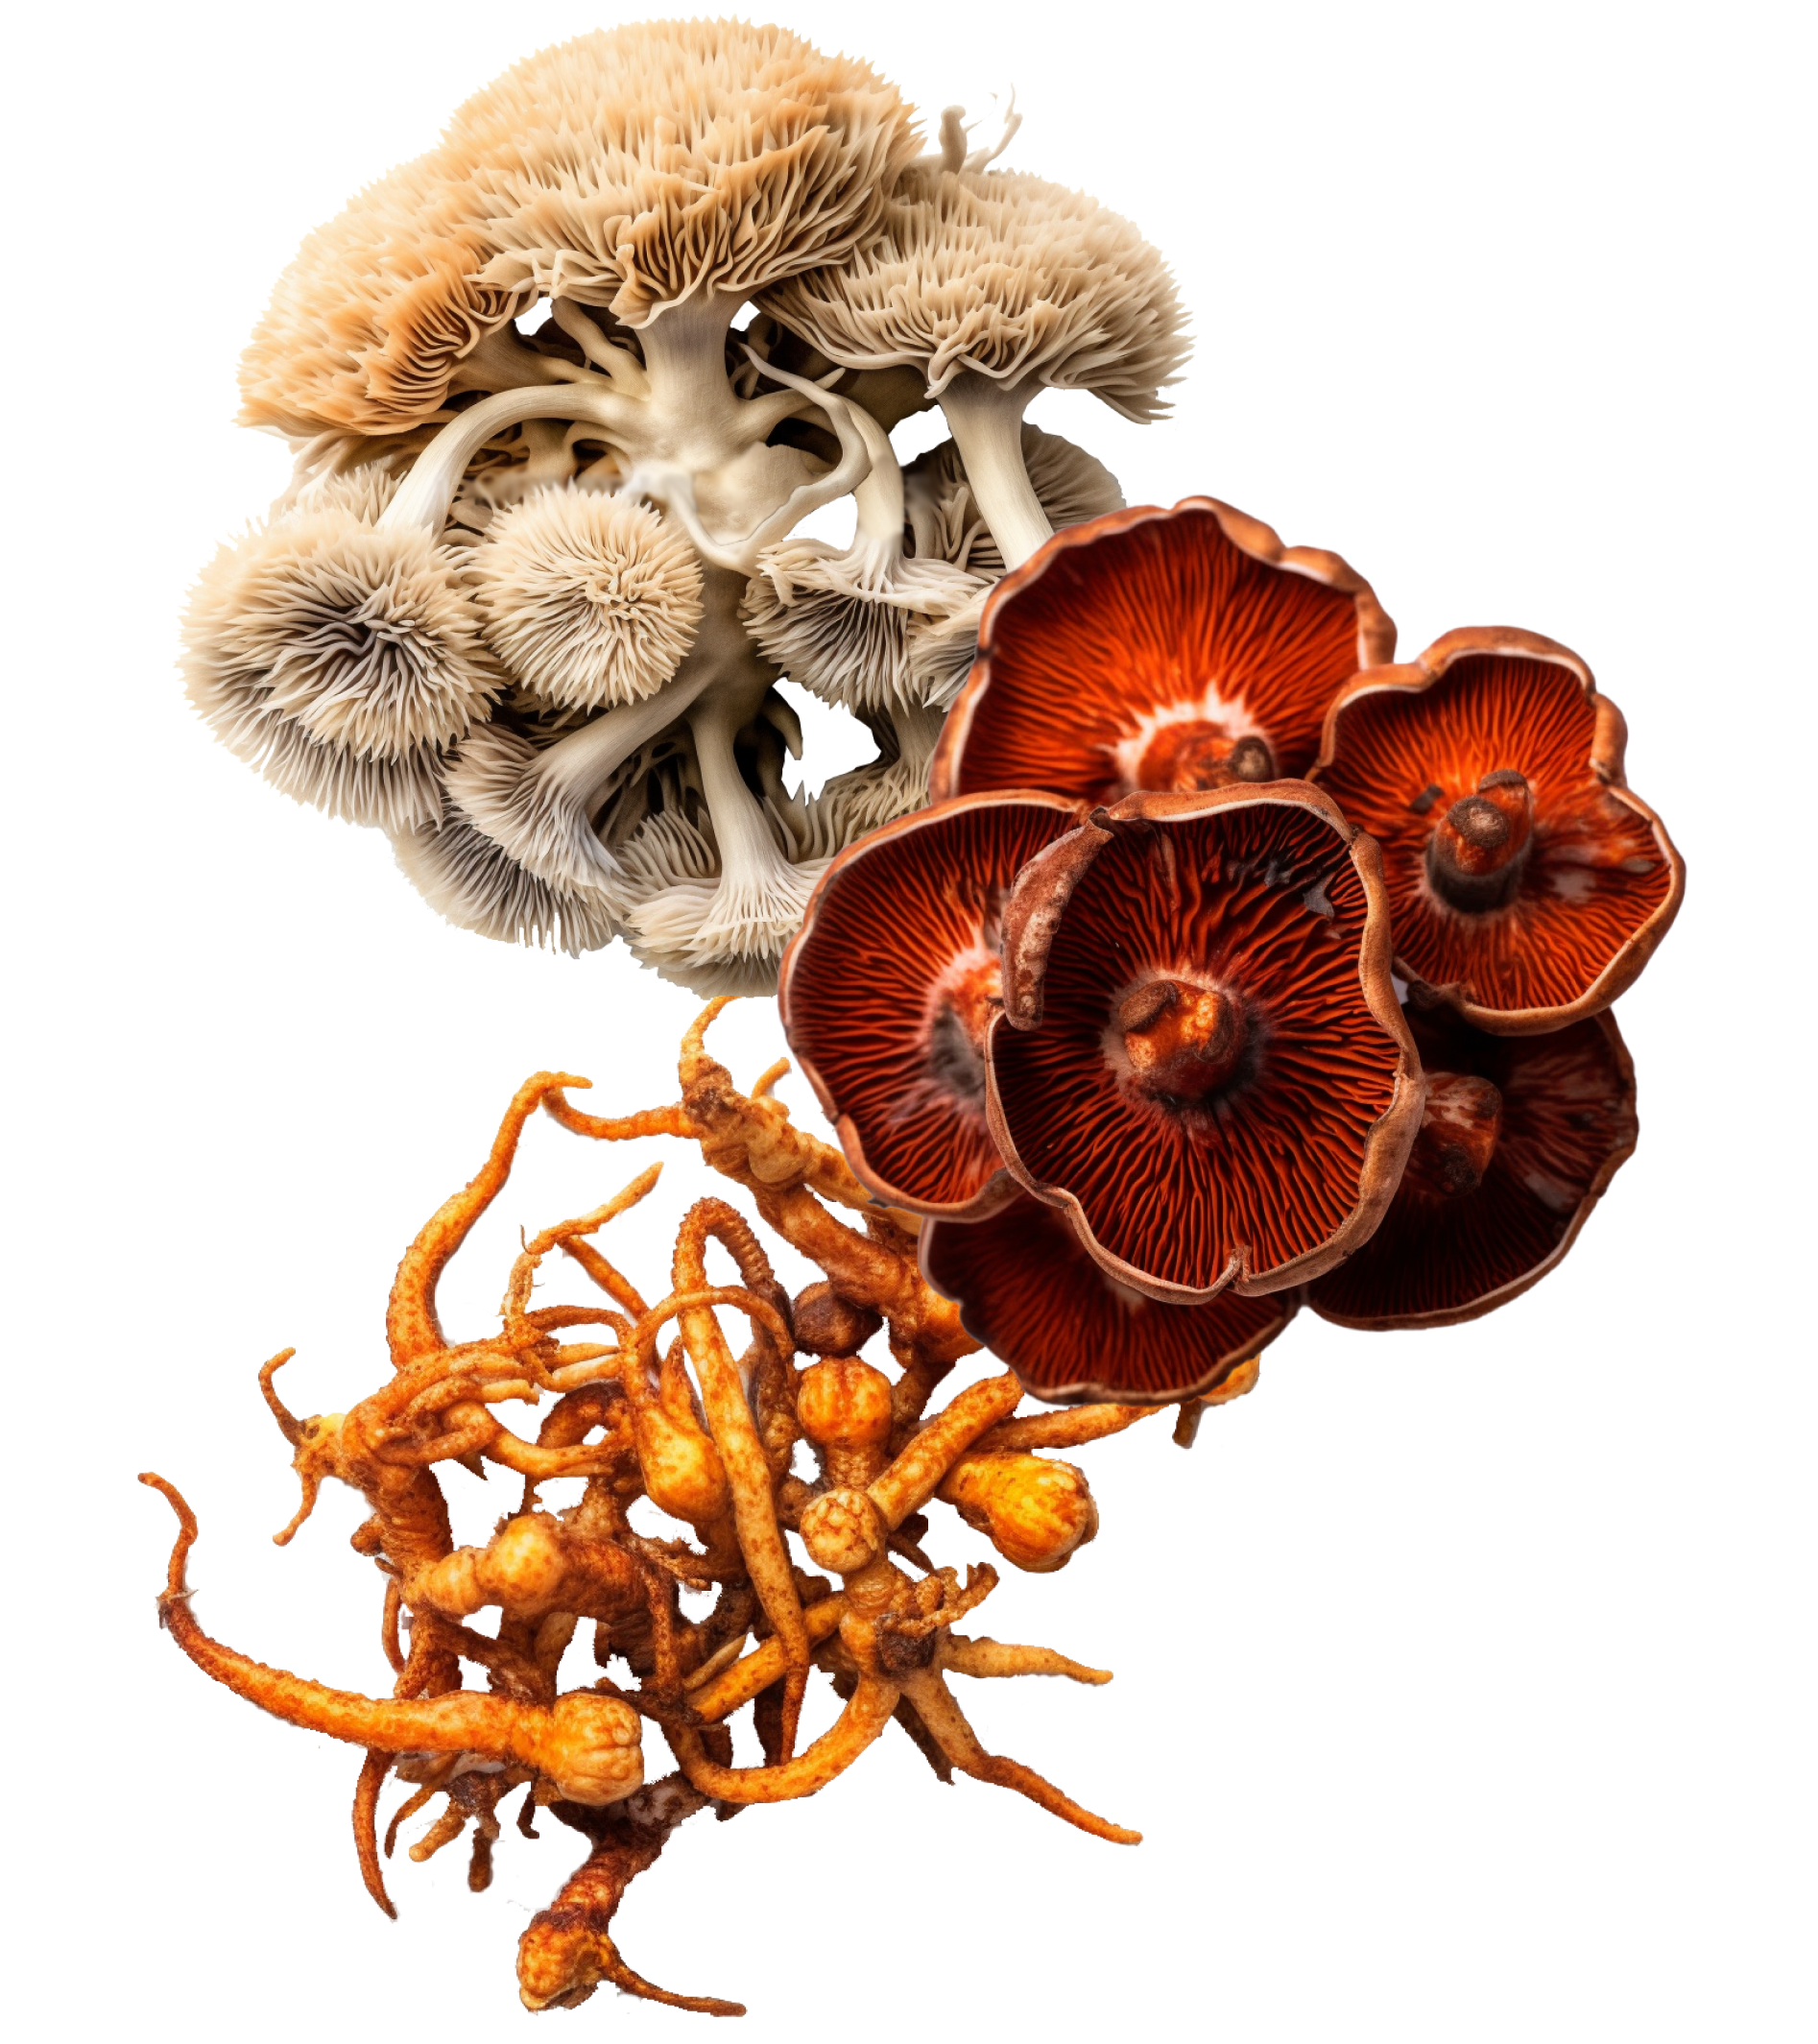 Reishi mushroom with bio-active compounds highlighted: ganoderic acid A, 1,3 and 1,6 beta-glucans, sterols. Lions Mane mushroom with bio-active compounds highlighted: hericinones, erinacines, 1,3 and 1,6 beta-glucans.Cordyceps mushroom with bio-active compounds highlighted: cordycepin, adenosine, mannitol, 1,3 and 1,6 beta-glucans.